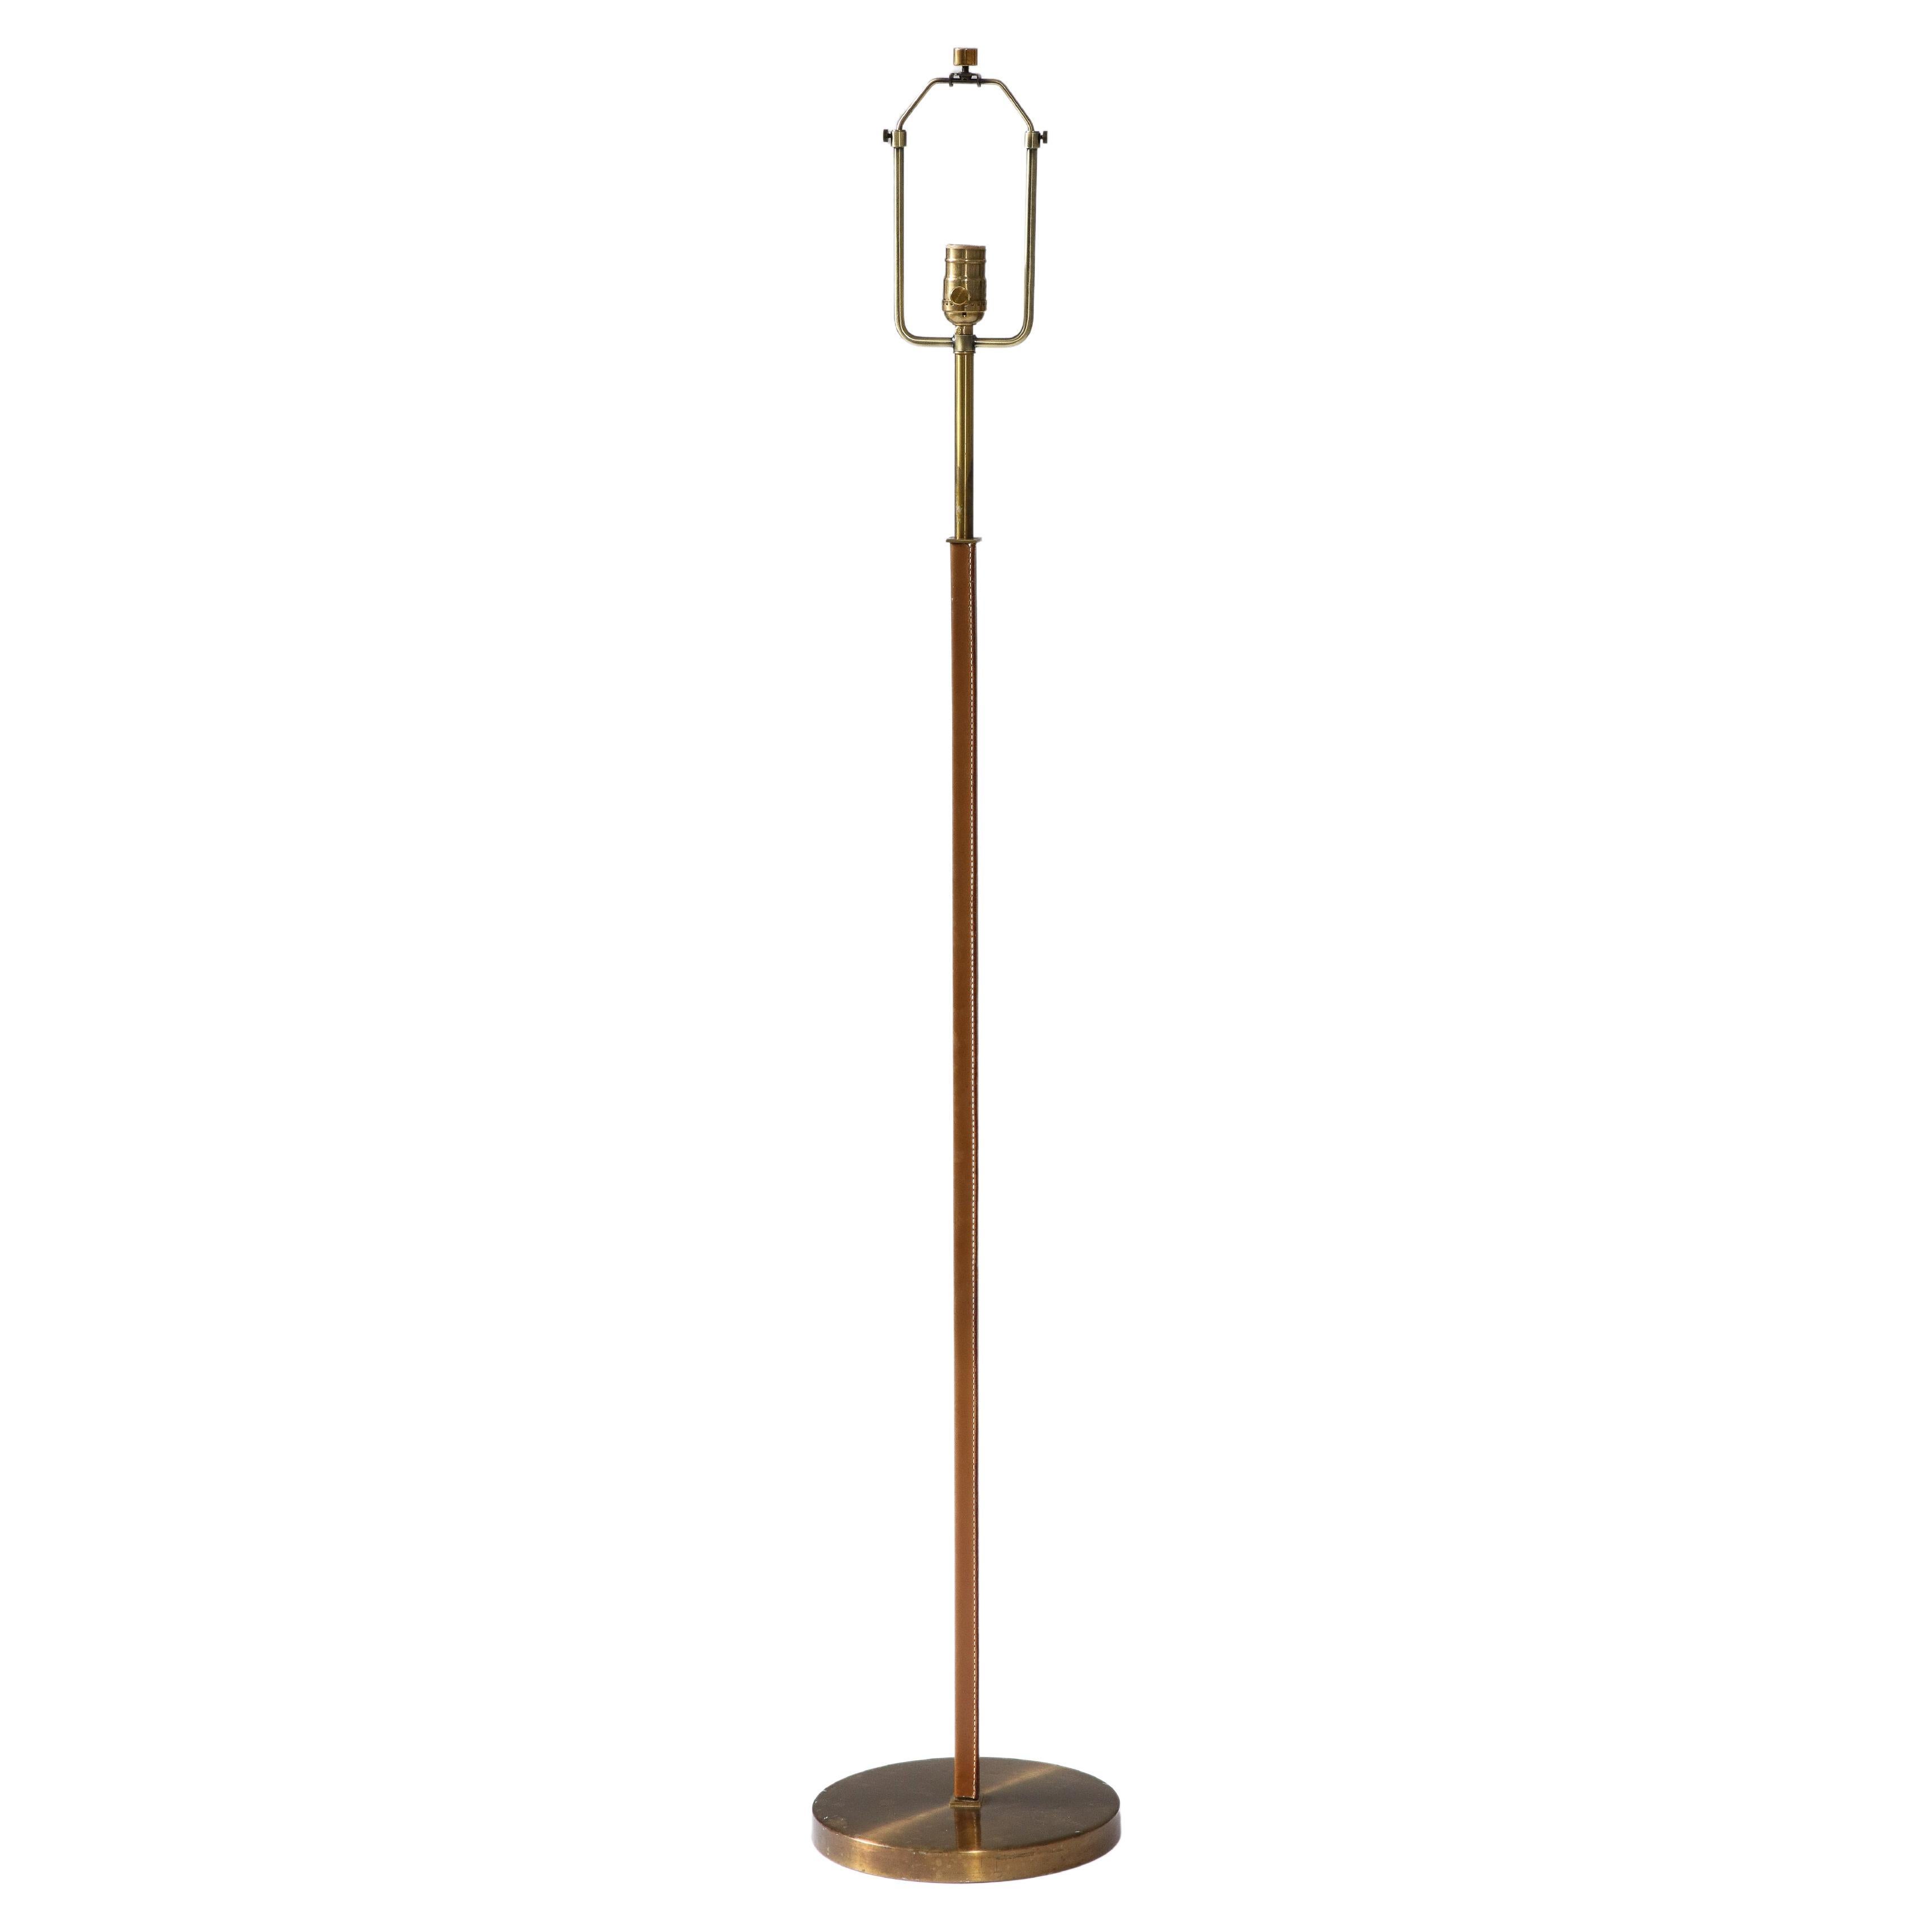 Brass and Leather Floor Lamp by Falkenbergs Belysning, Sweden, c. 1950